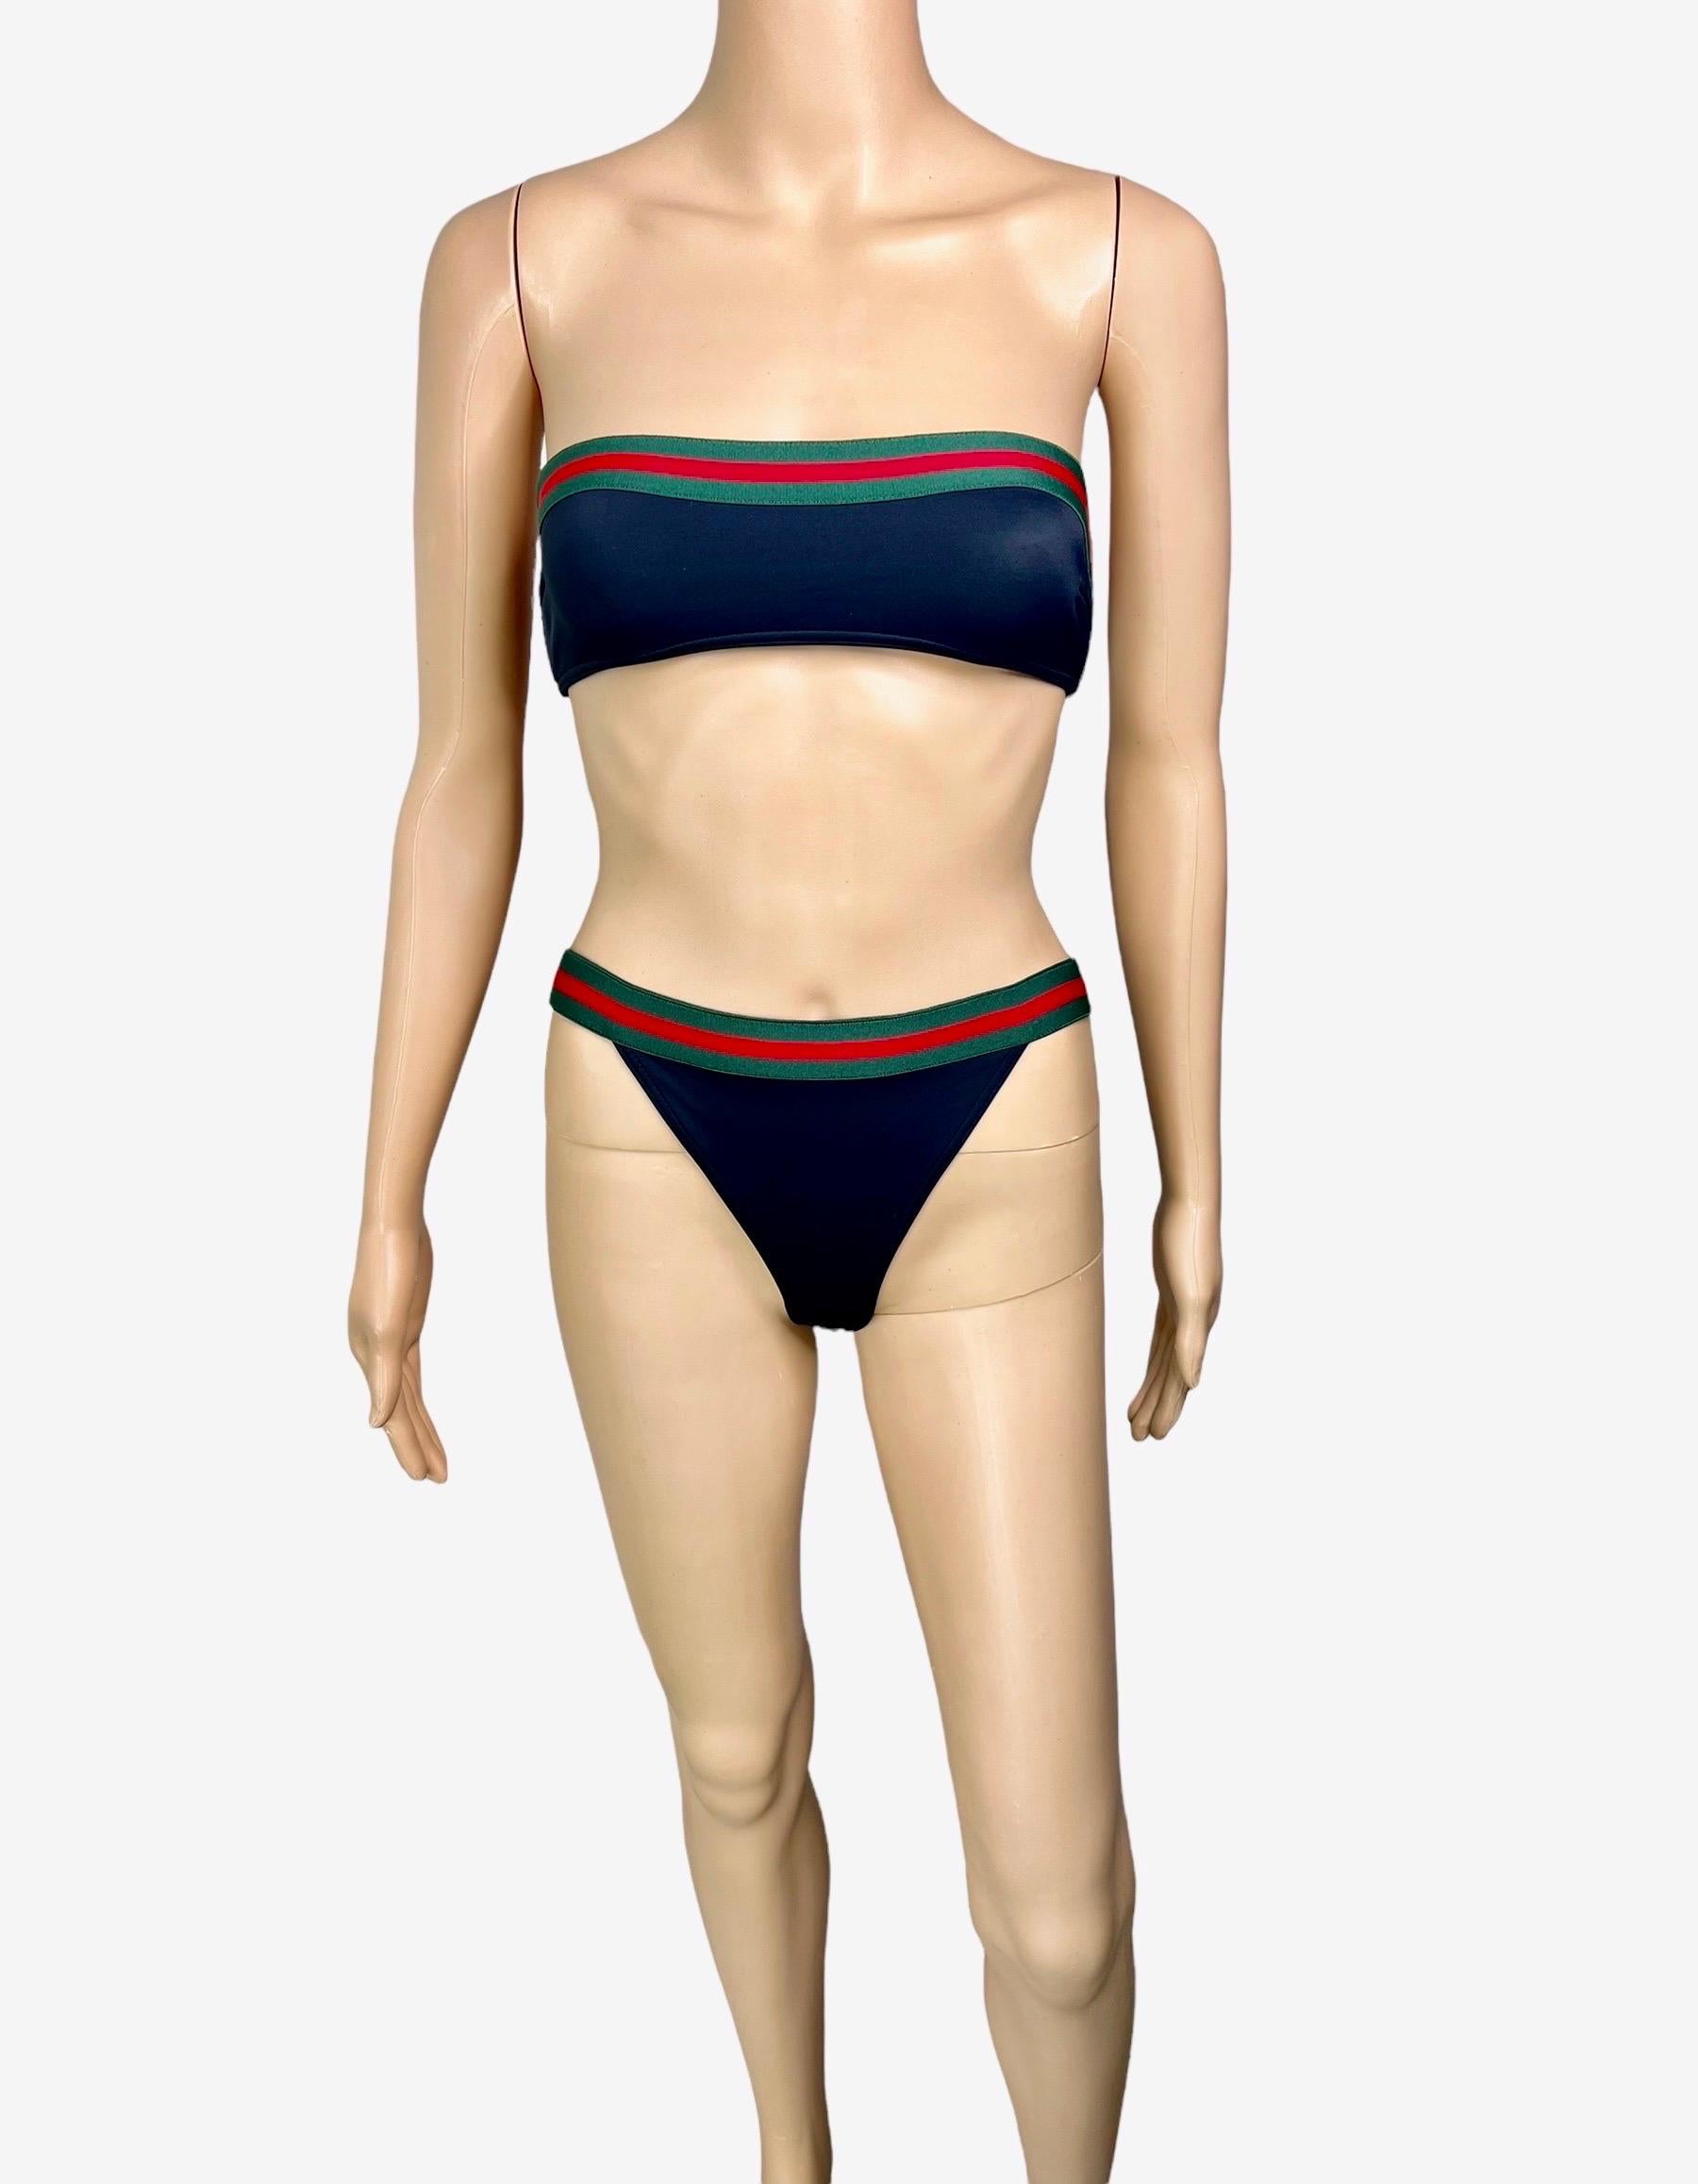 Tom Ford for Gucci S/S 1999 Strapless Bra & Bikini Two-Piece Swimwear Swimsuit In Good Condition For Sale In Naples, FL